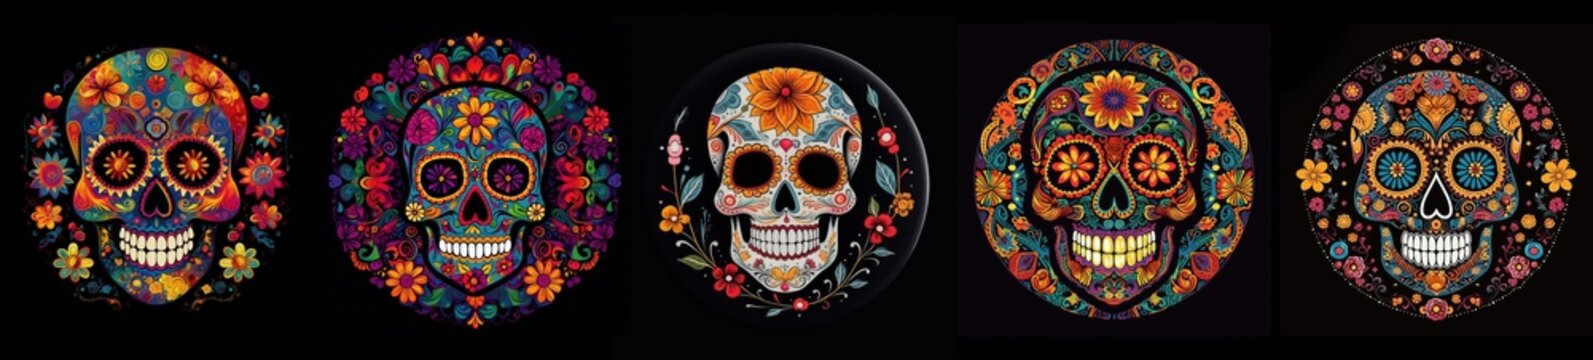 Group of 5 colorful Day of the Dead Sugar Skull mandalas.  On a black background.  Abstract illustration created with Generative AI technology. 